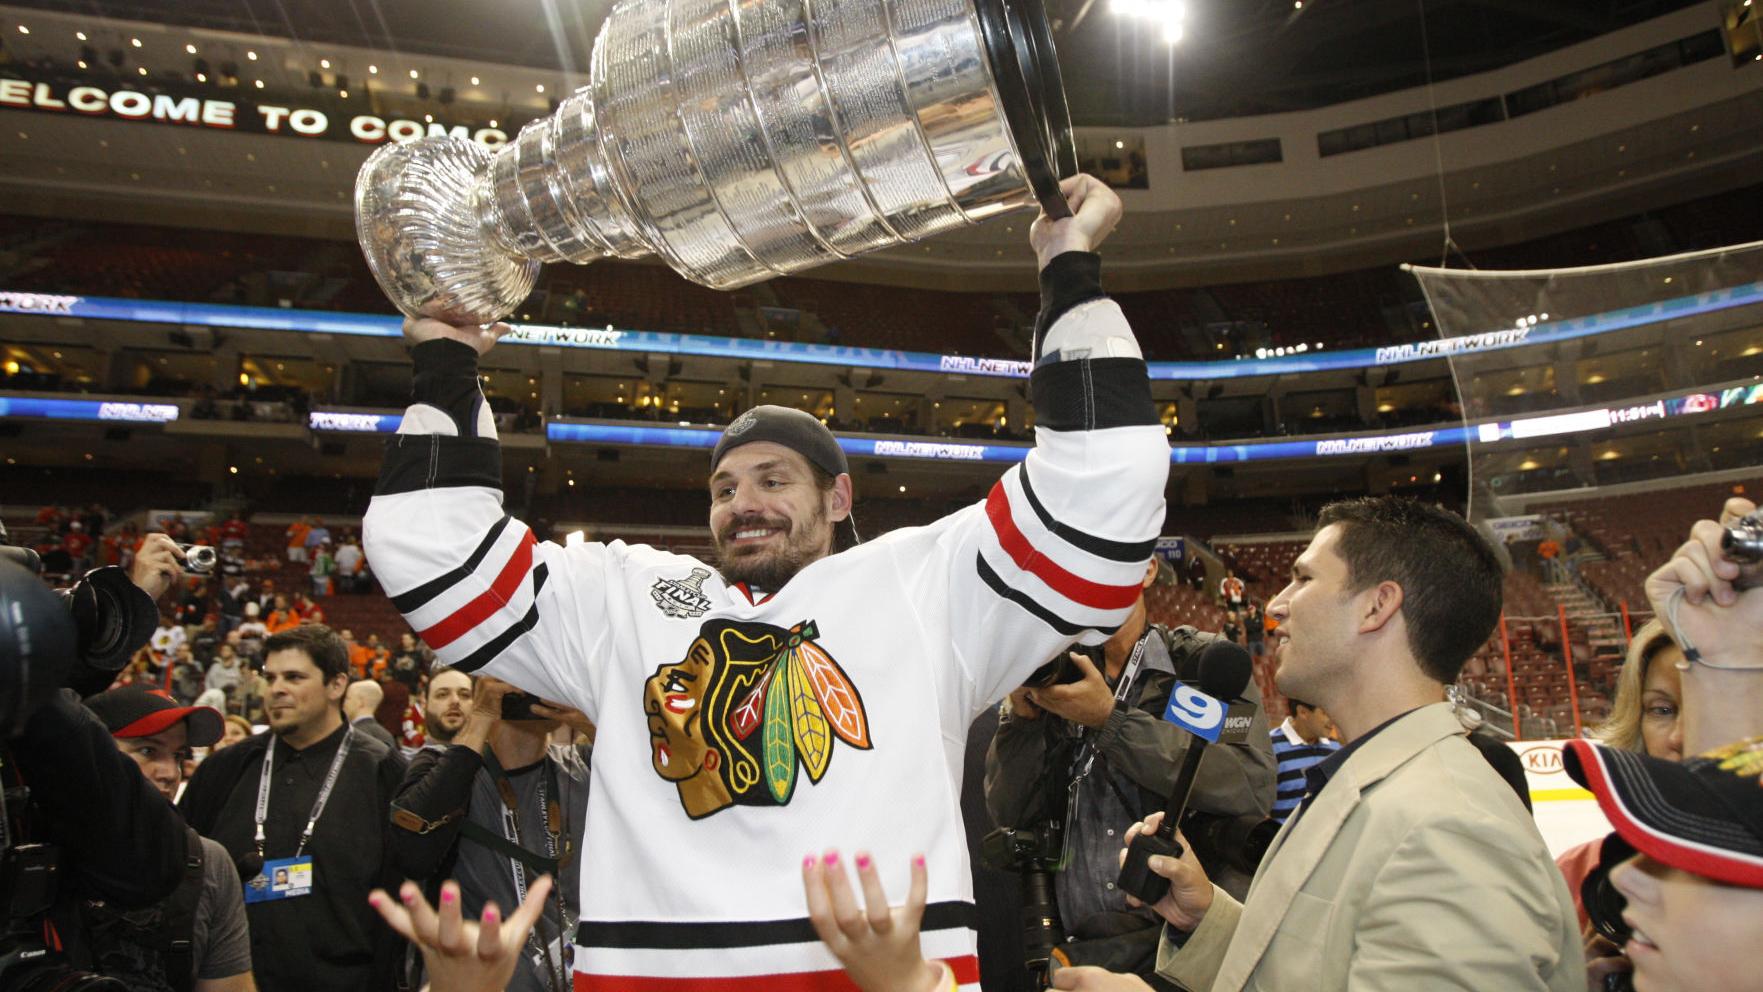 Stanley Cup winner Brent Sopel shares dark moments confronting dyslexia